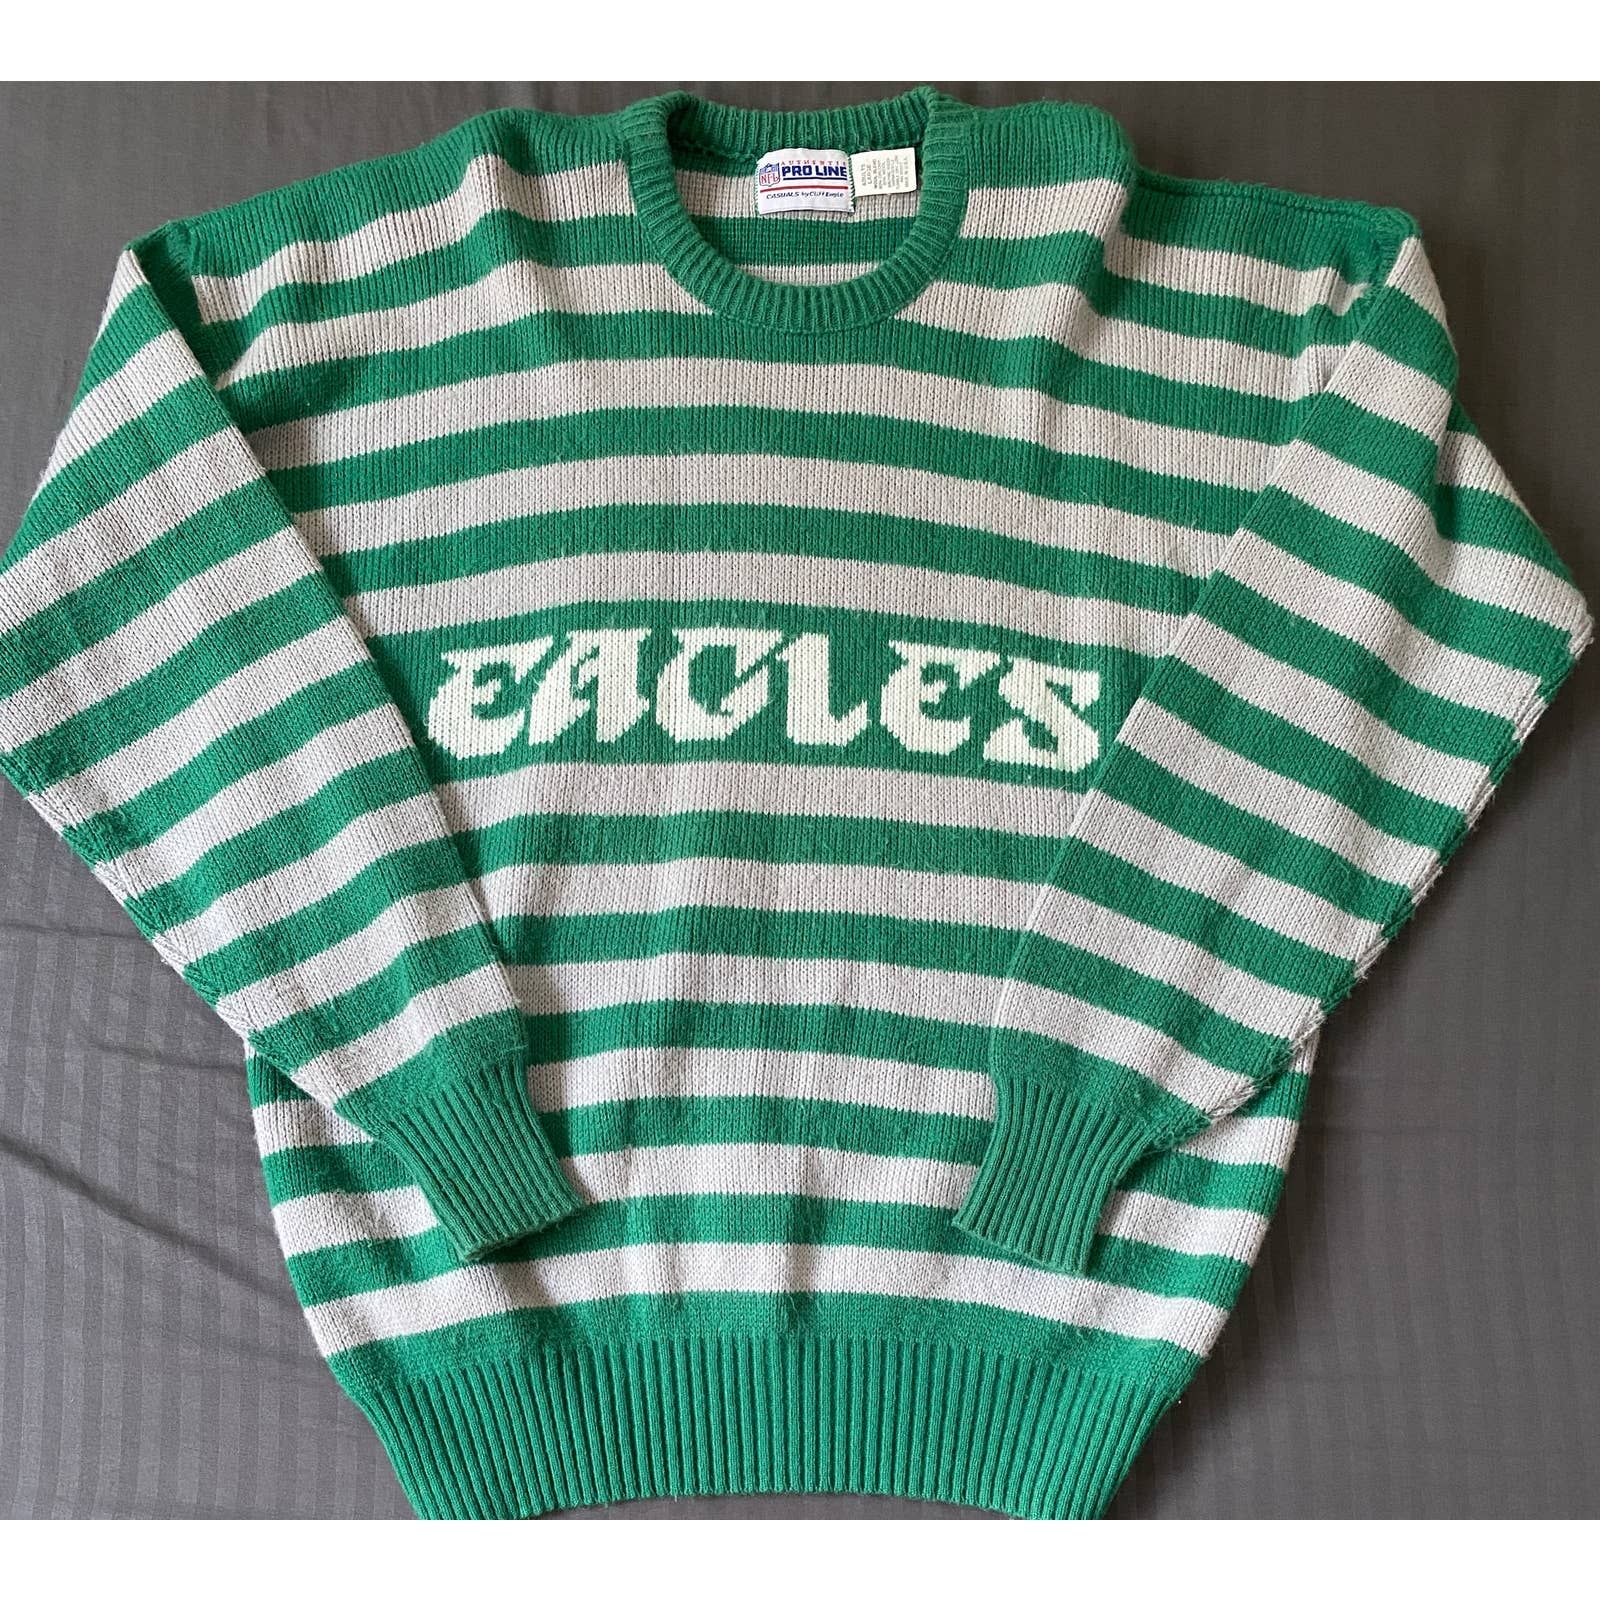 cliff engle eagles sweater